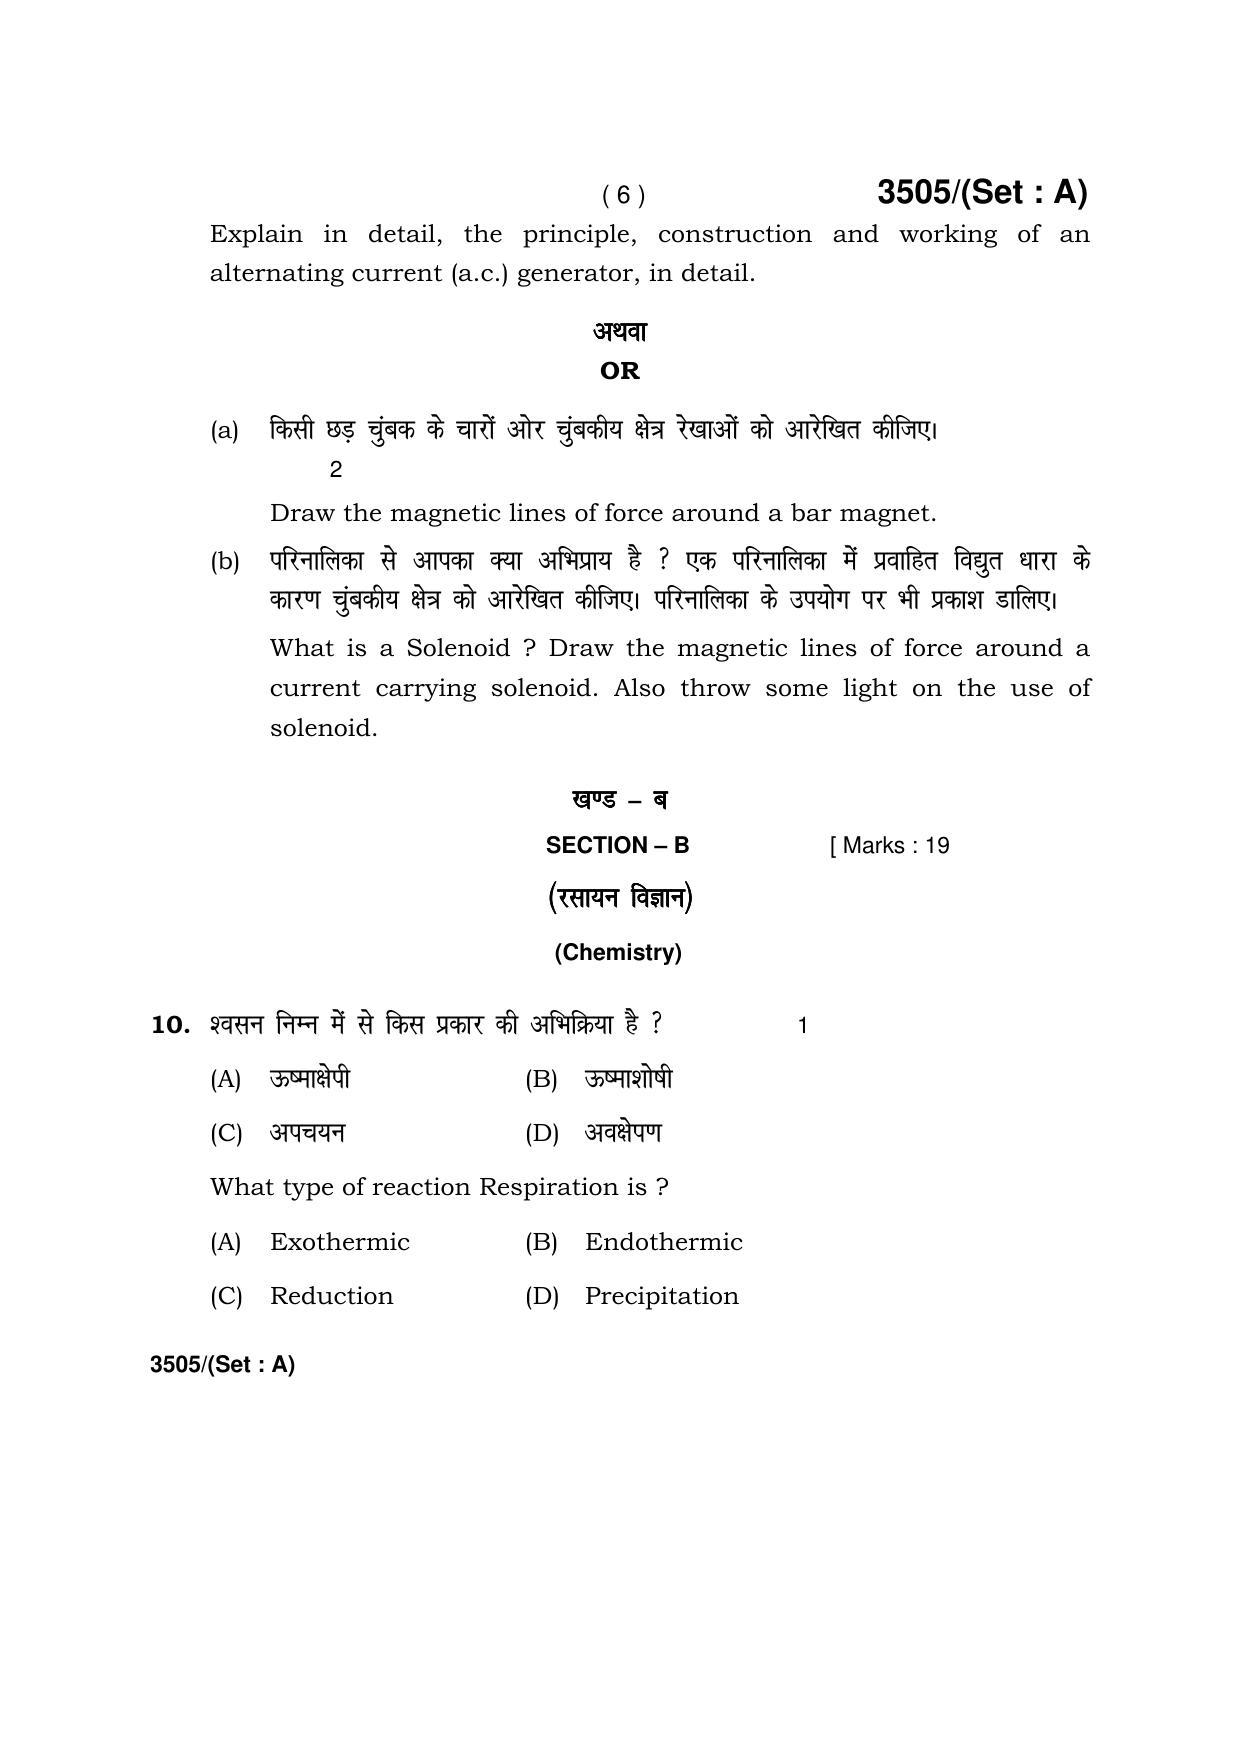 Haryana Board HBSE Class 10 Science -A 2018 Question Paper - Page 6